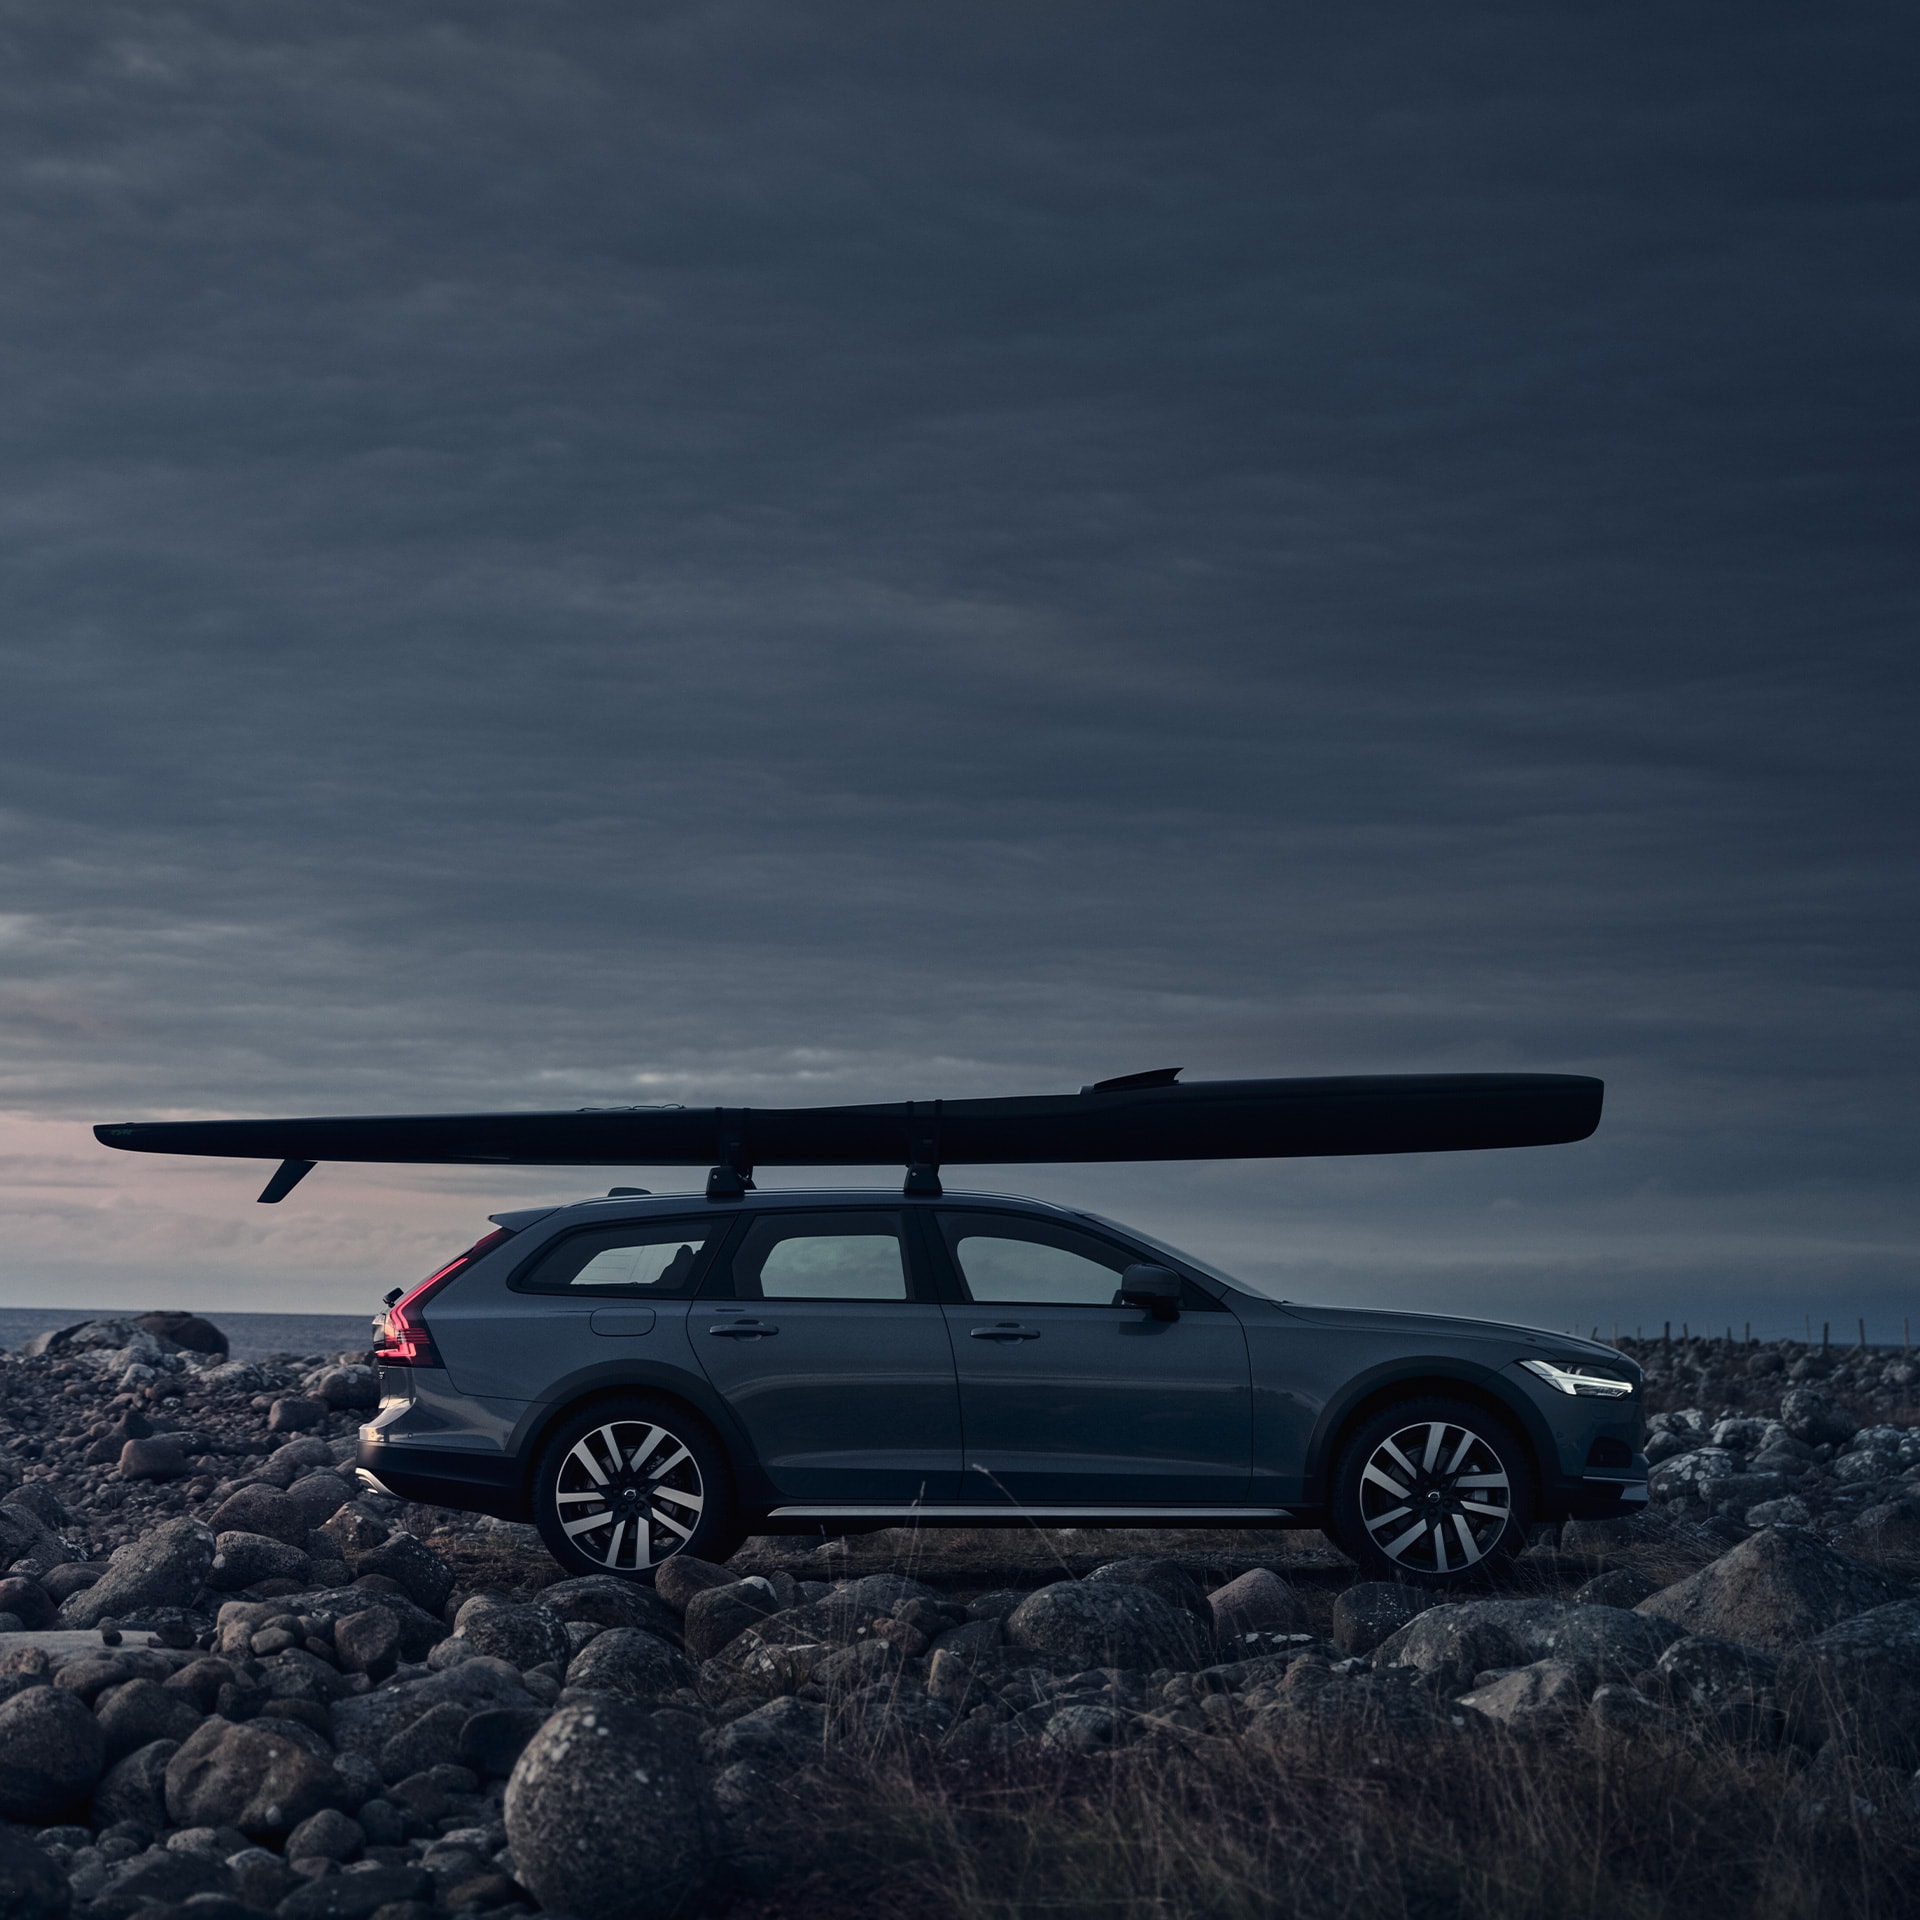 A Volvo V90 Cross Country with lifestyle accessories to carry your gear.